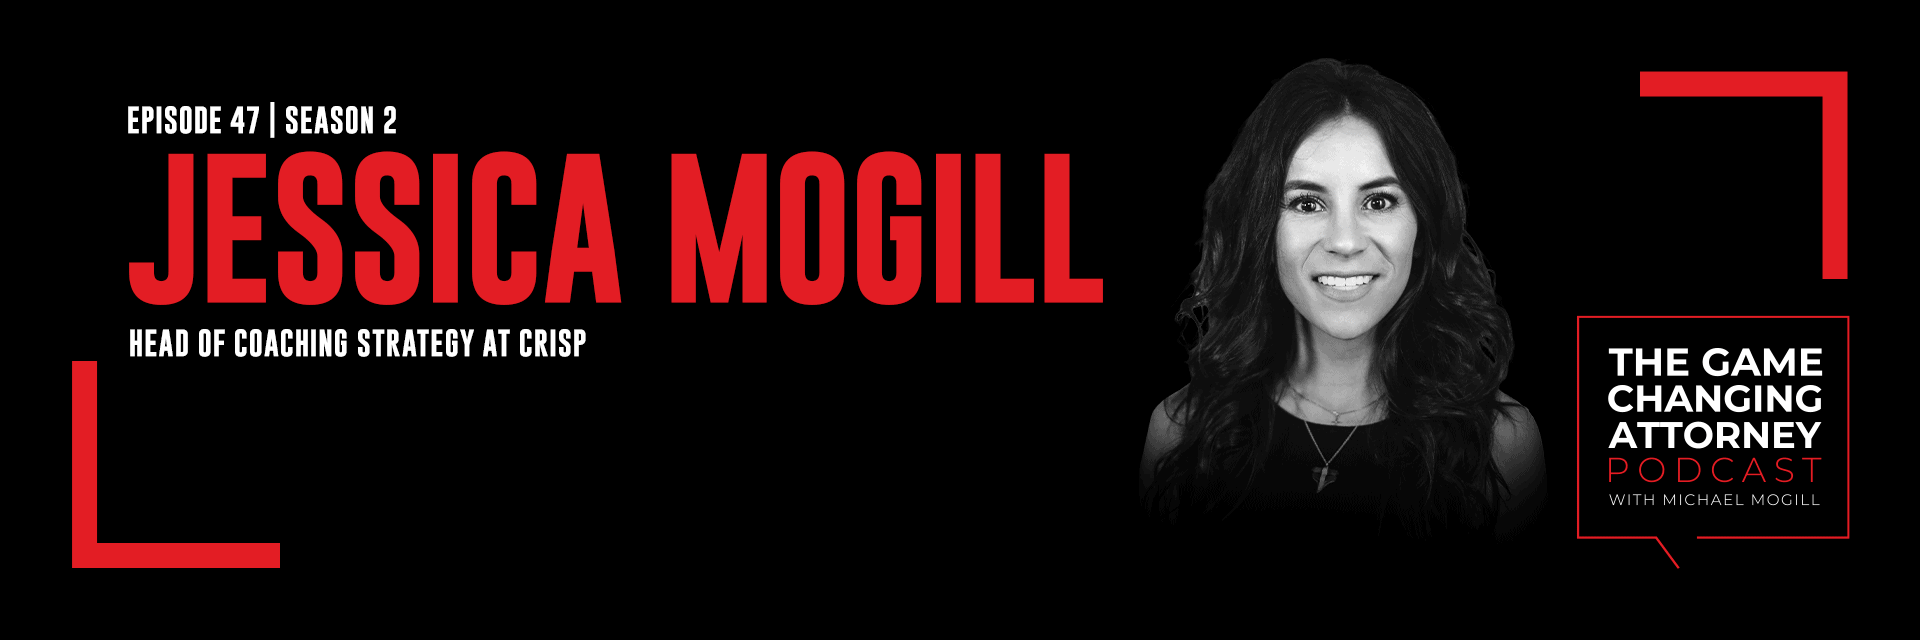 Jessica Mogill - The Game Changing Attorney Podcast - Desktop